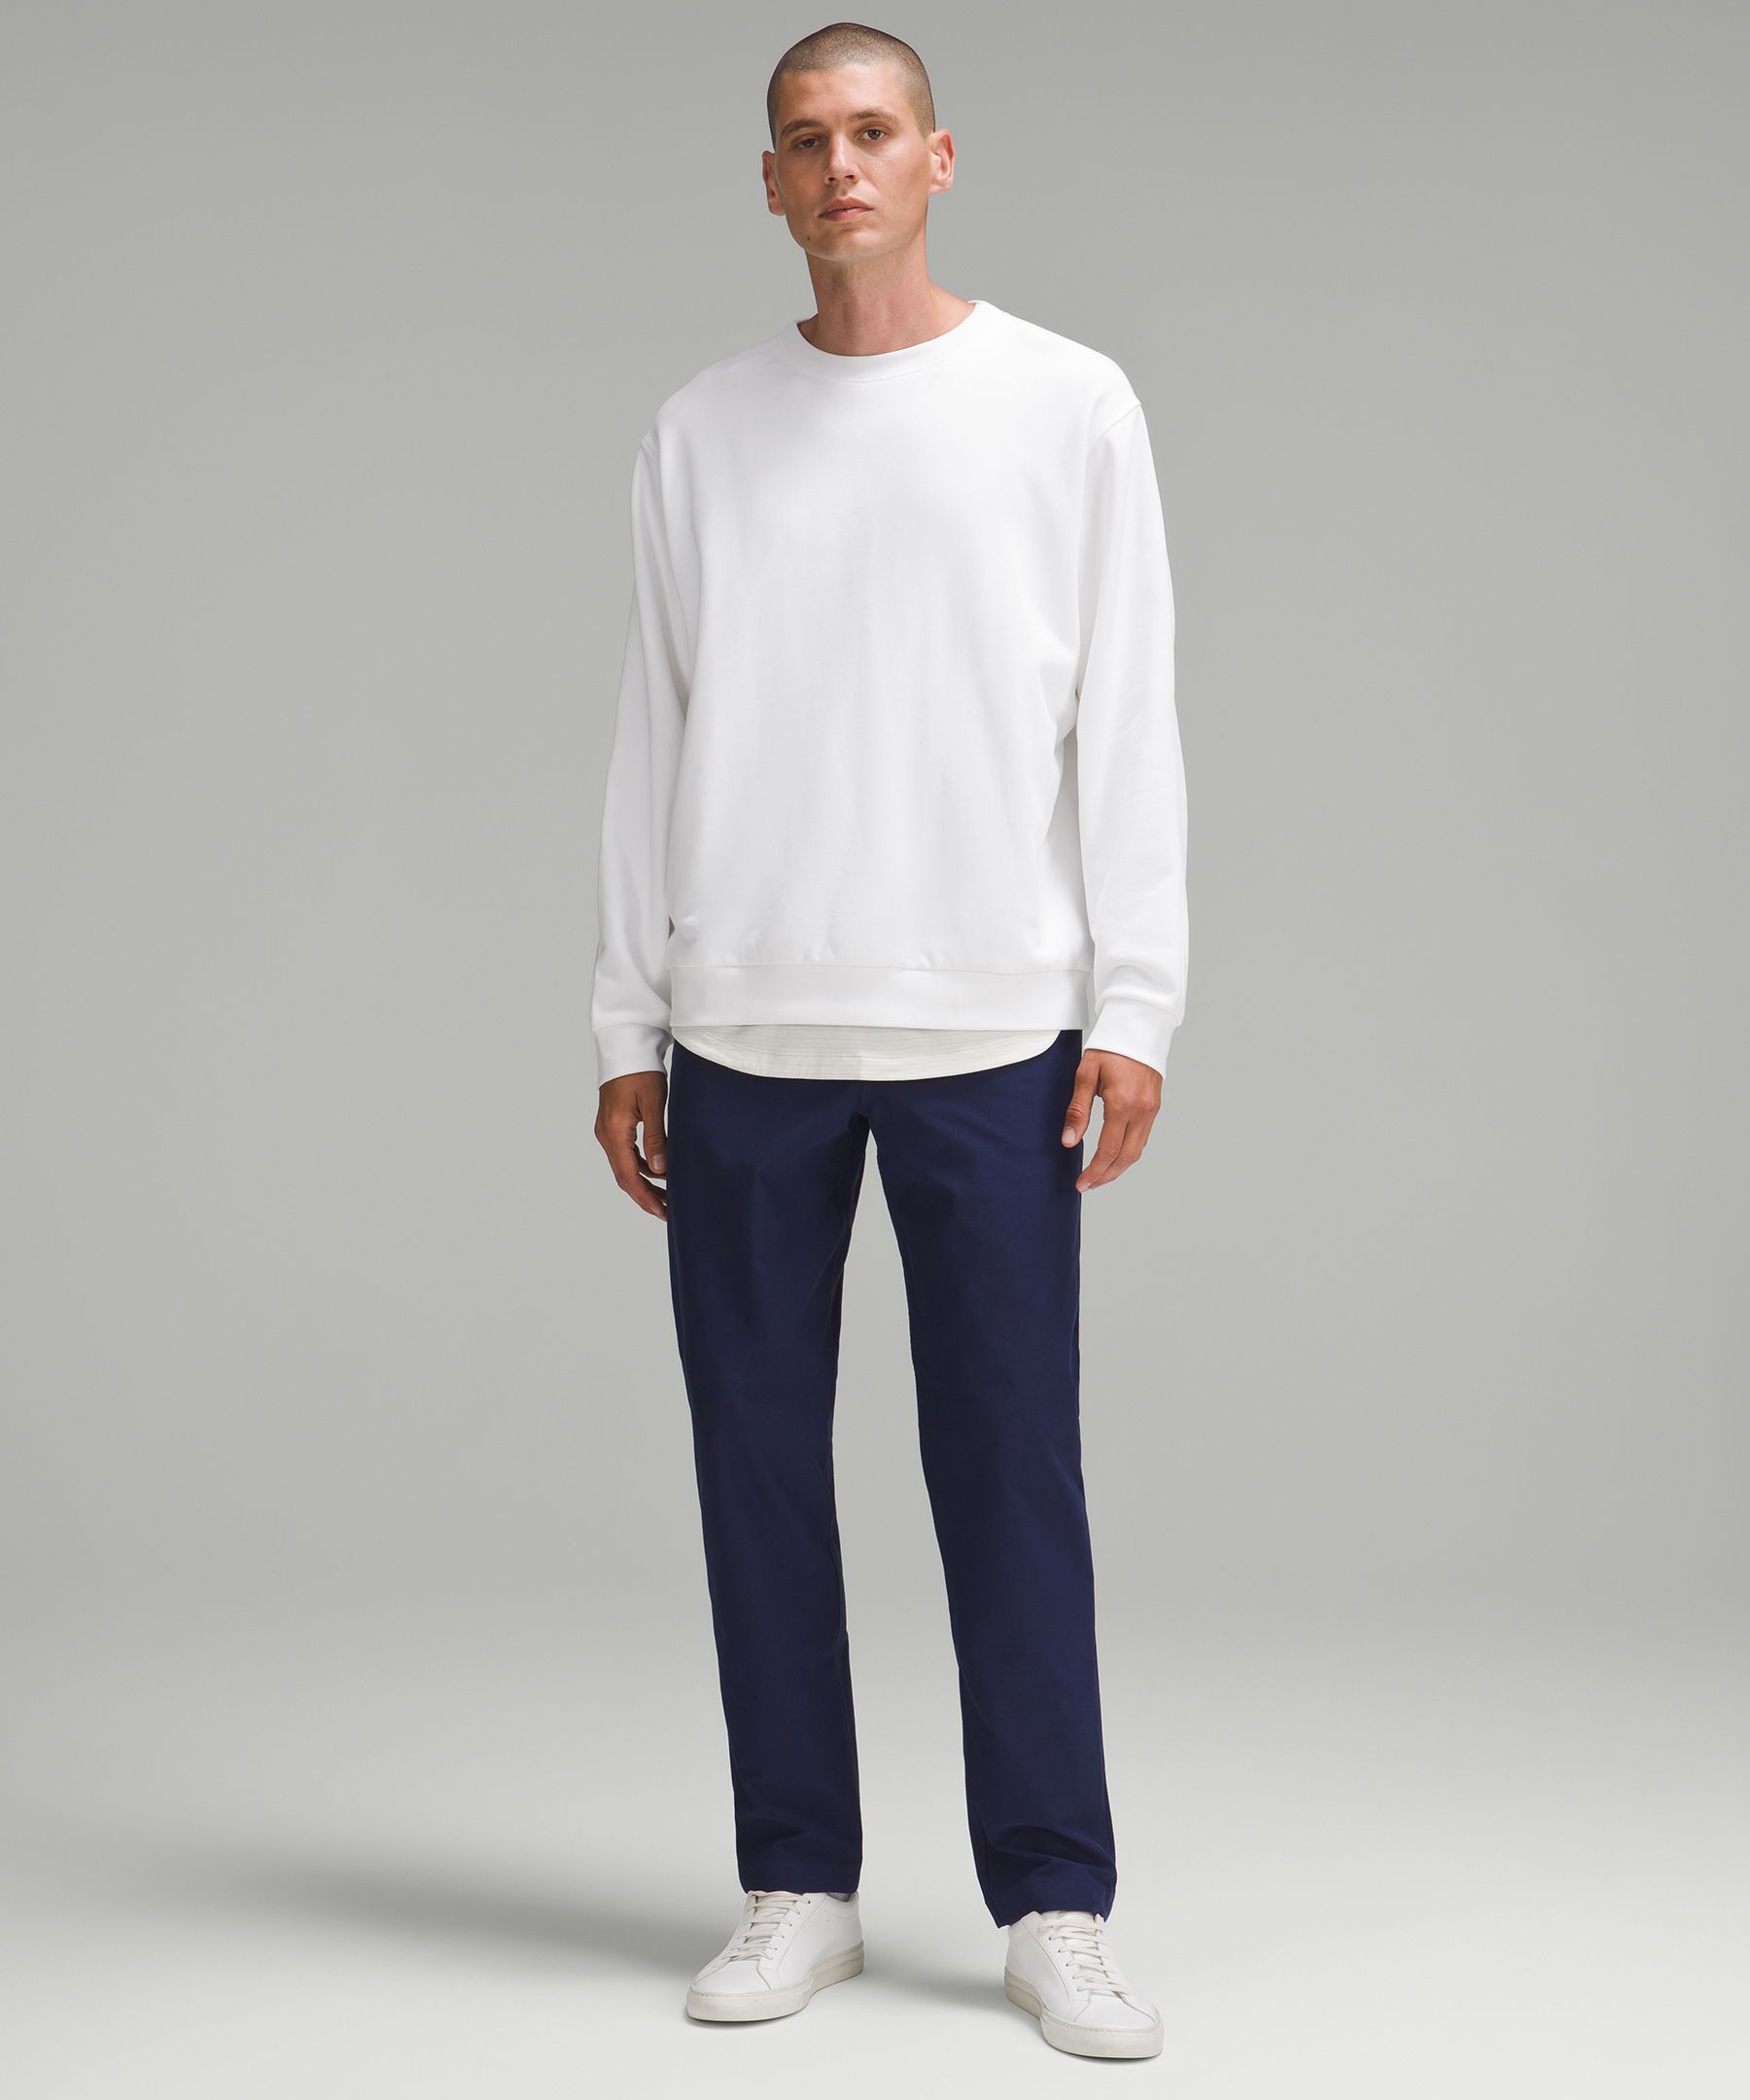 The word for today was layers: ABC Skinny-Fit Pant 32” * Utilitech in White  Opal + The Fundamental Long Sleeve Shirt (Size L) in Black + Surge Warm 1/2  Zip in Heathered